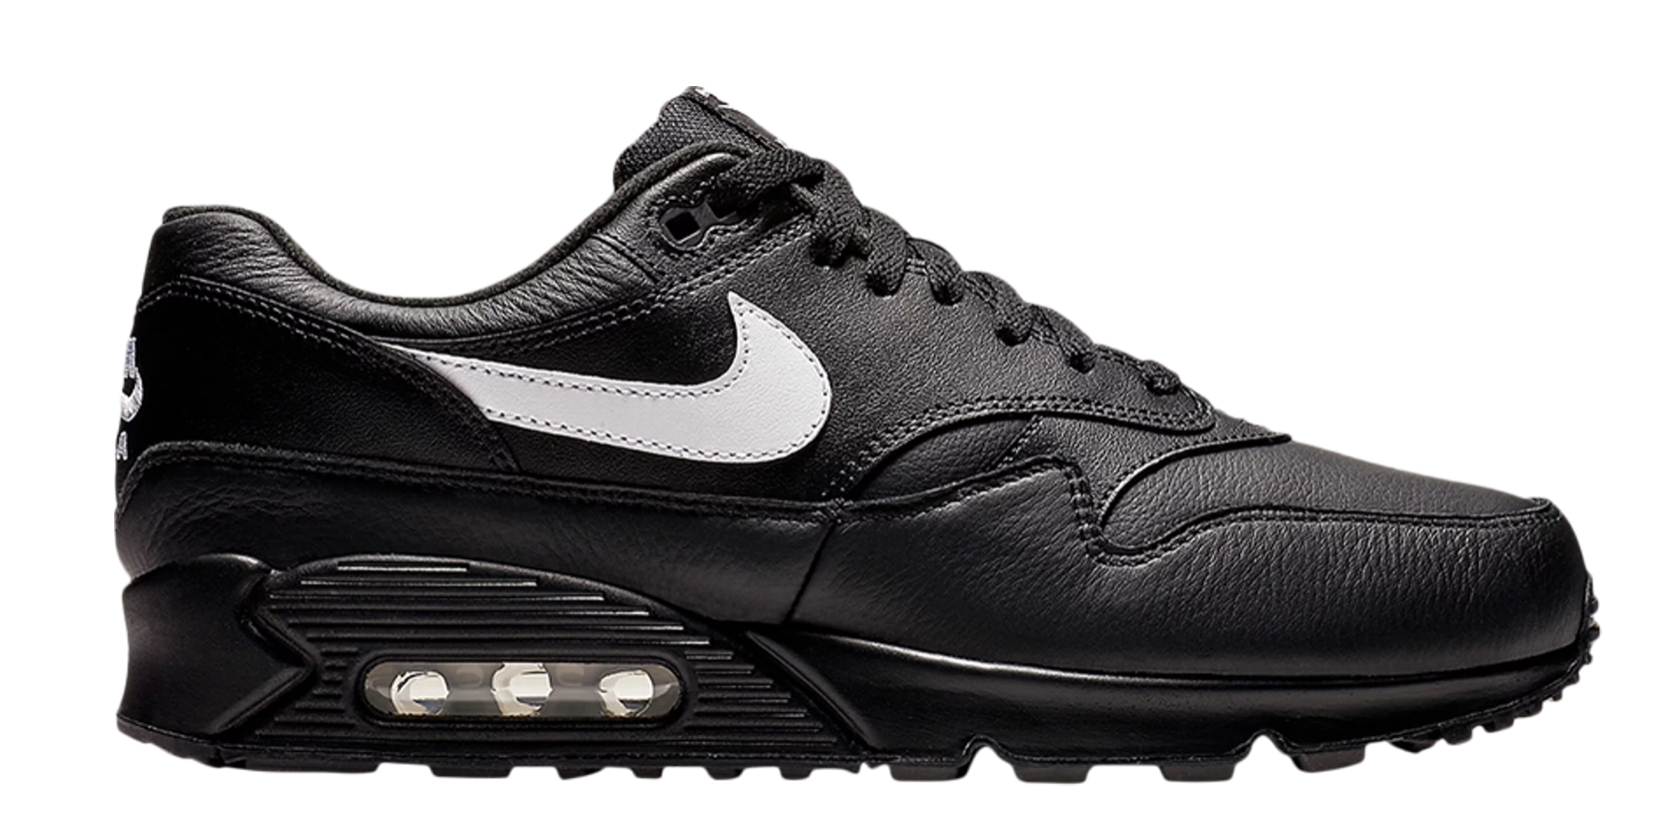 Men's Air Max 90 Leather Running Shoes